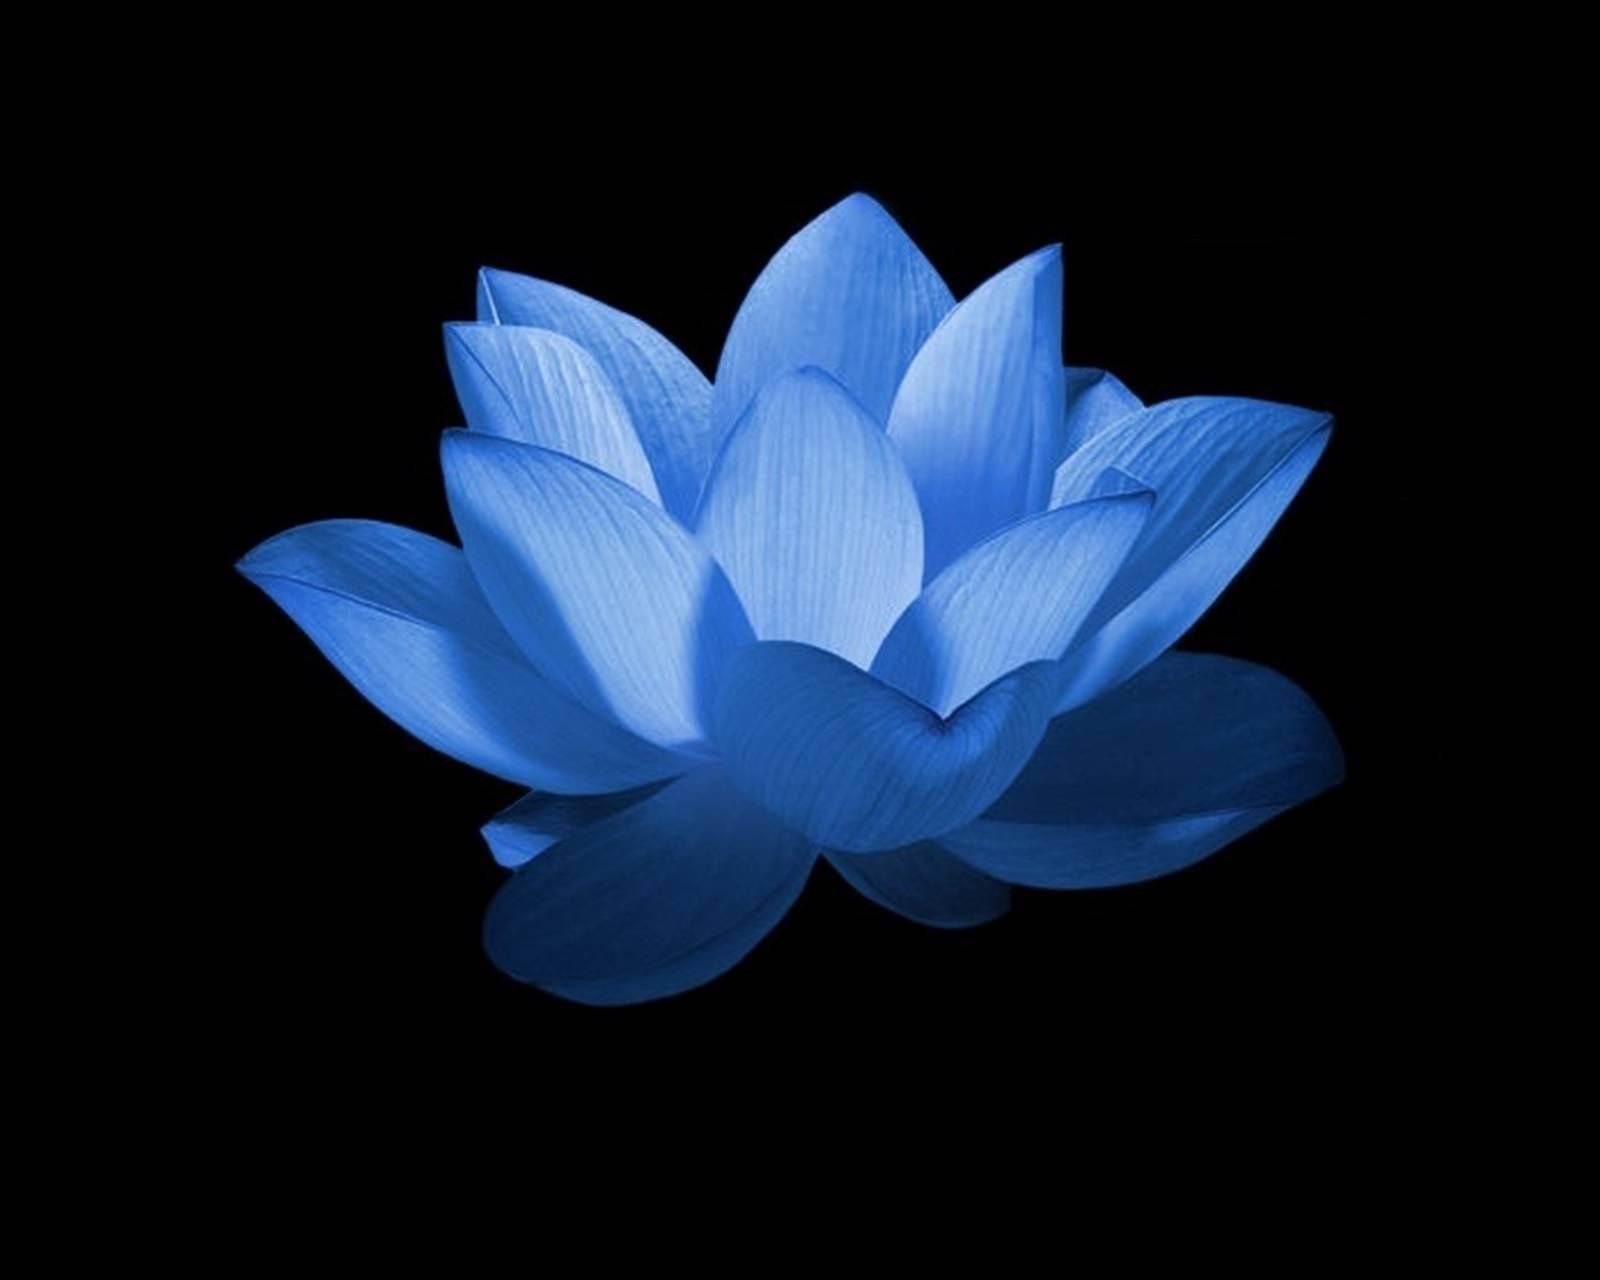 Small Blue Lotus Flower Wallpaper Free Small Blue Lotus Flower Background